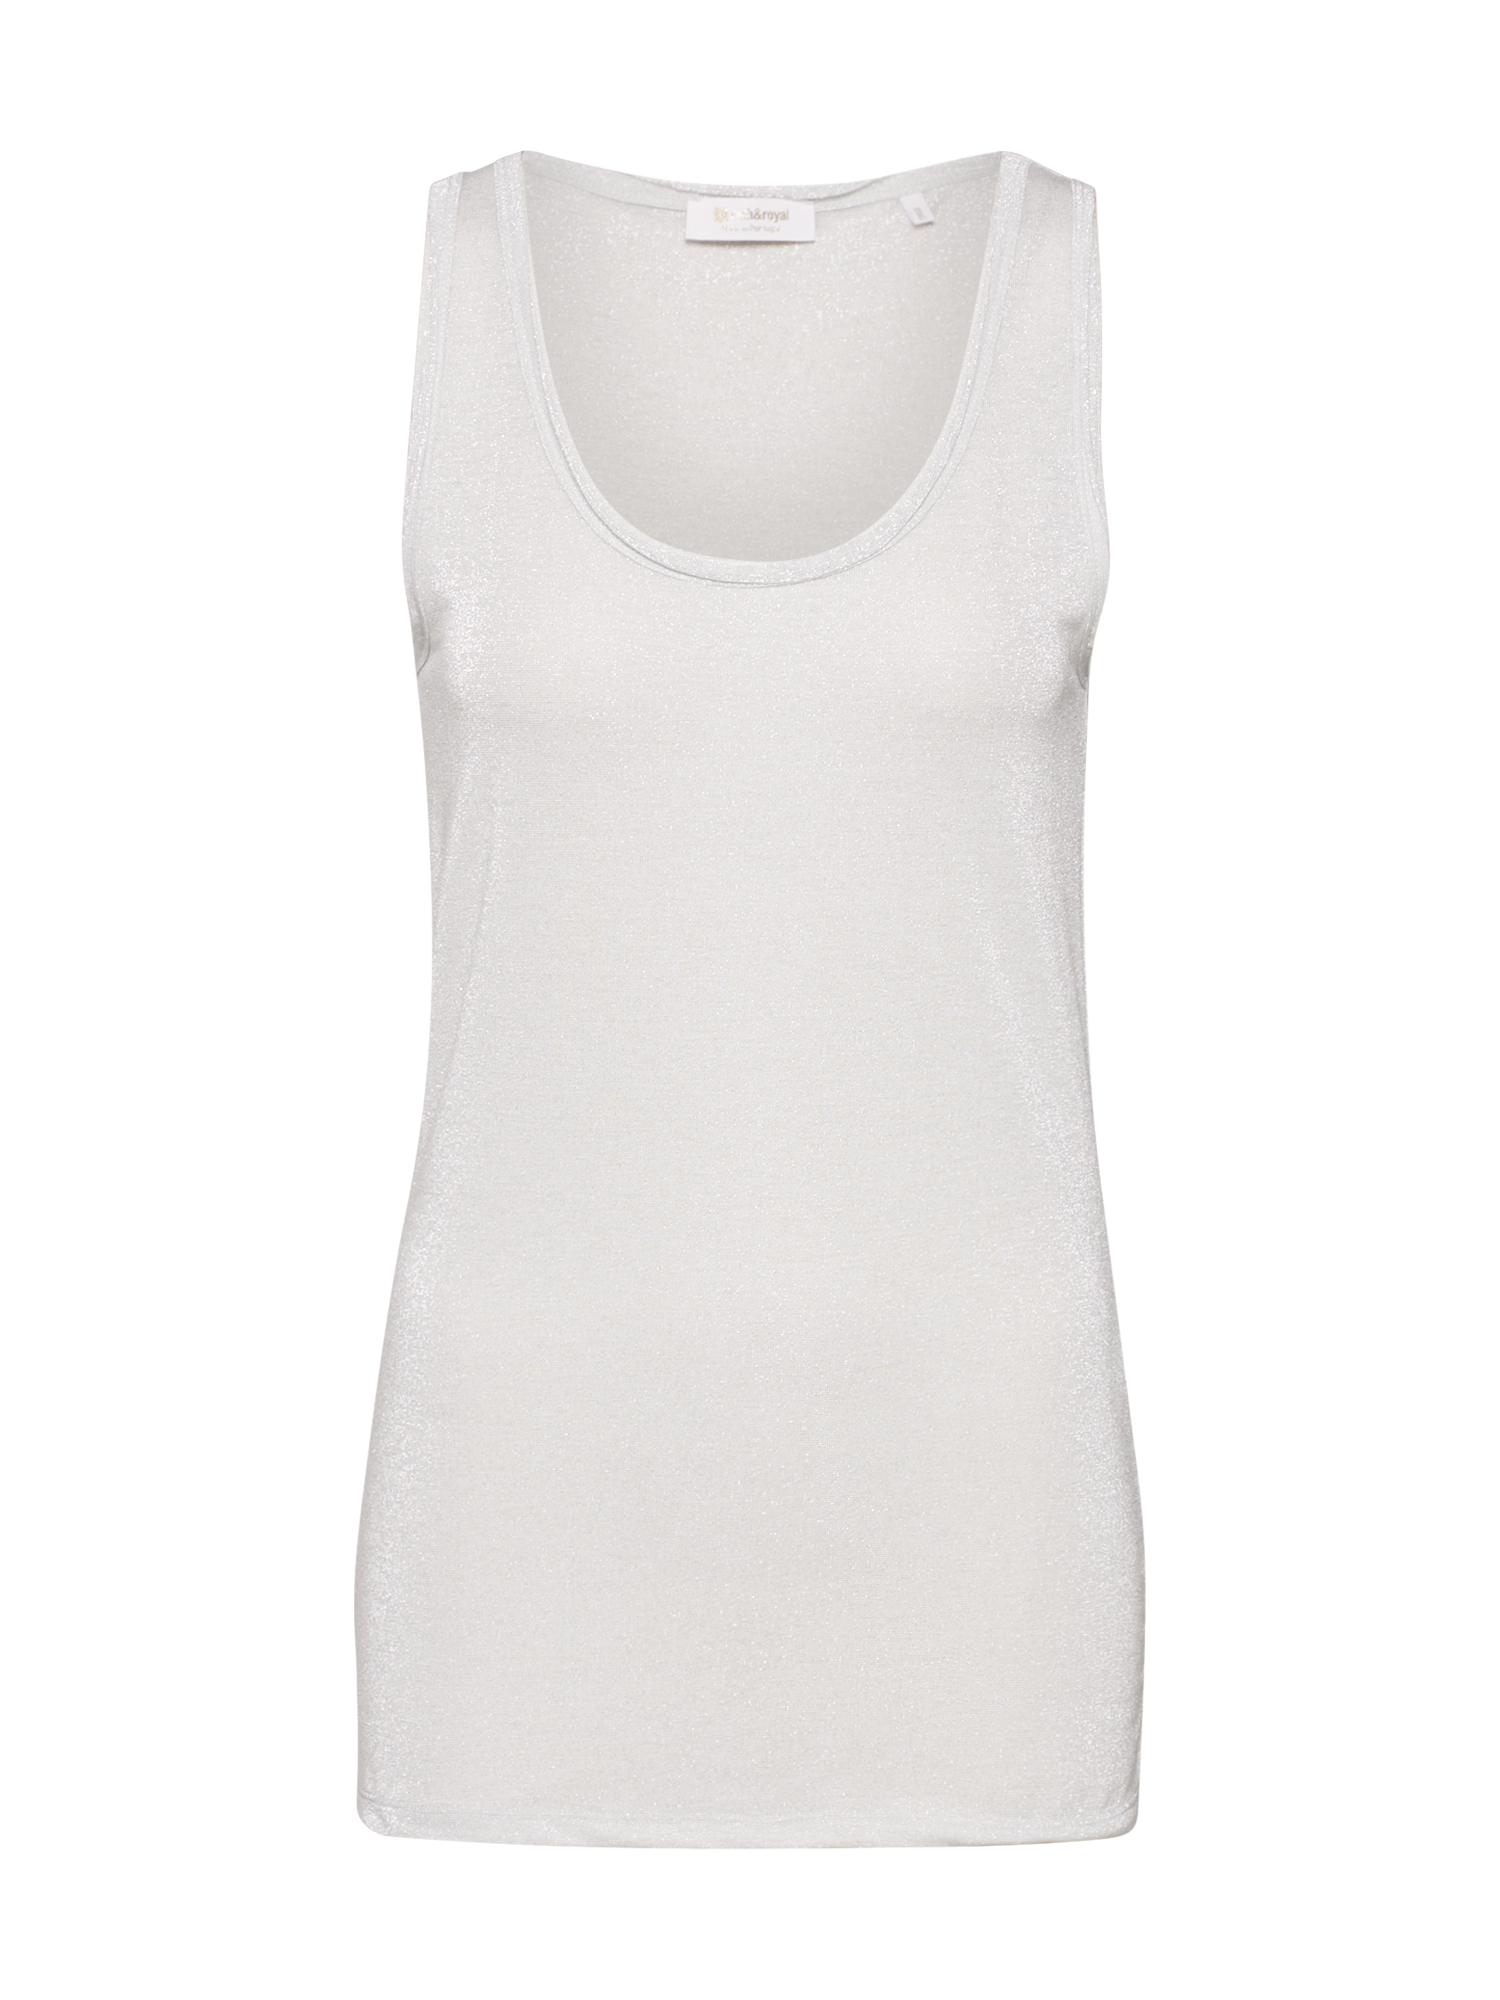 Maglie e top Donna Rich & Royal Top in Bianco 